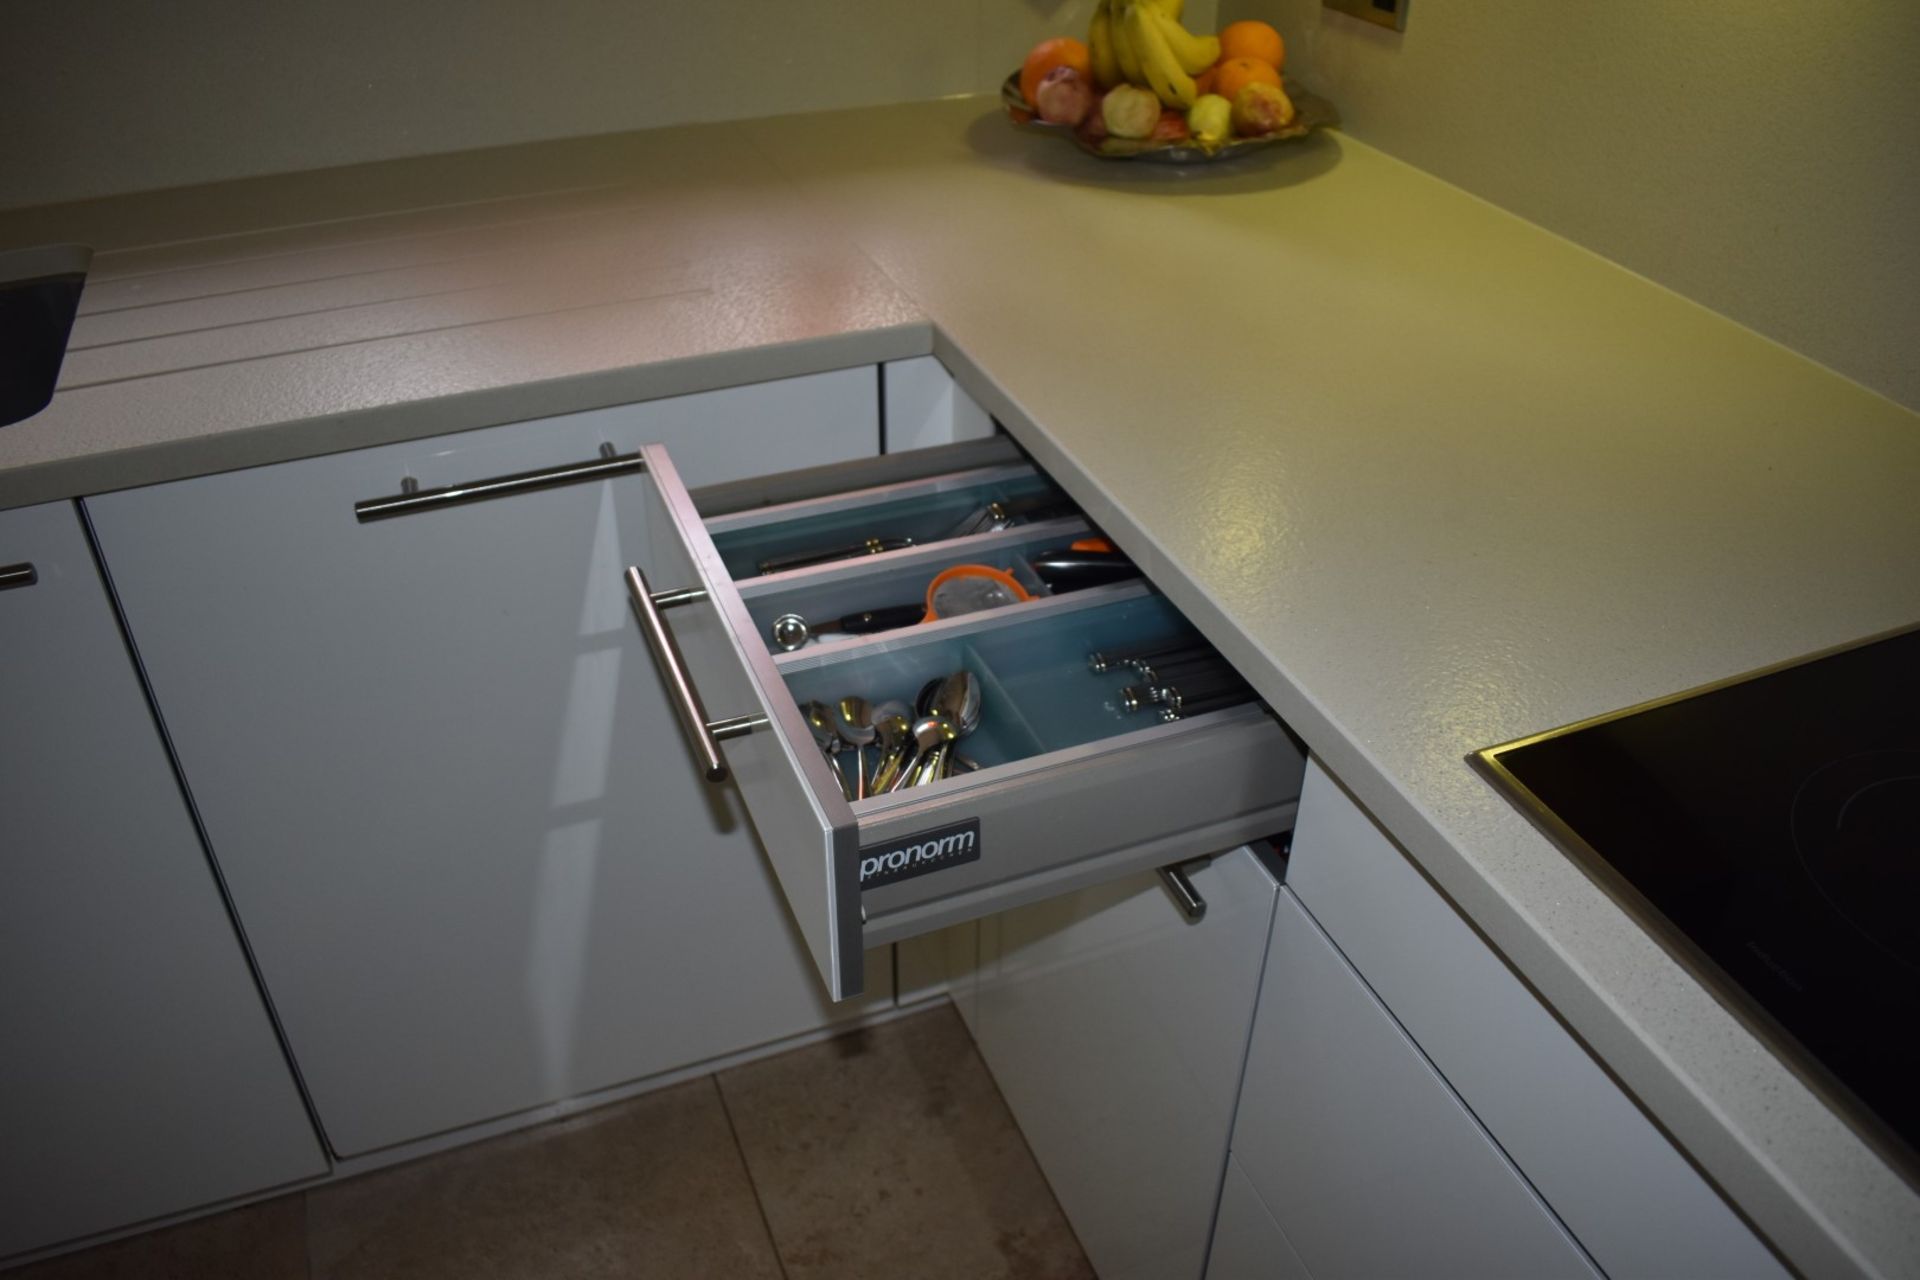 1 x Pronorm Einbauküchen German Made Fitted Kitchen With Contemporary High Gloss Cream Doors and - Image 19 of 51